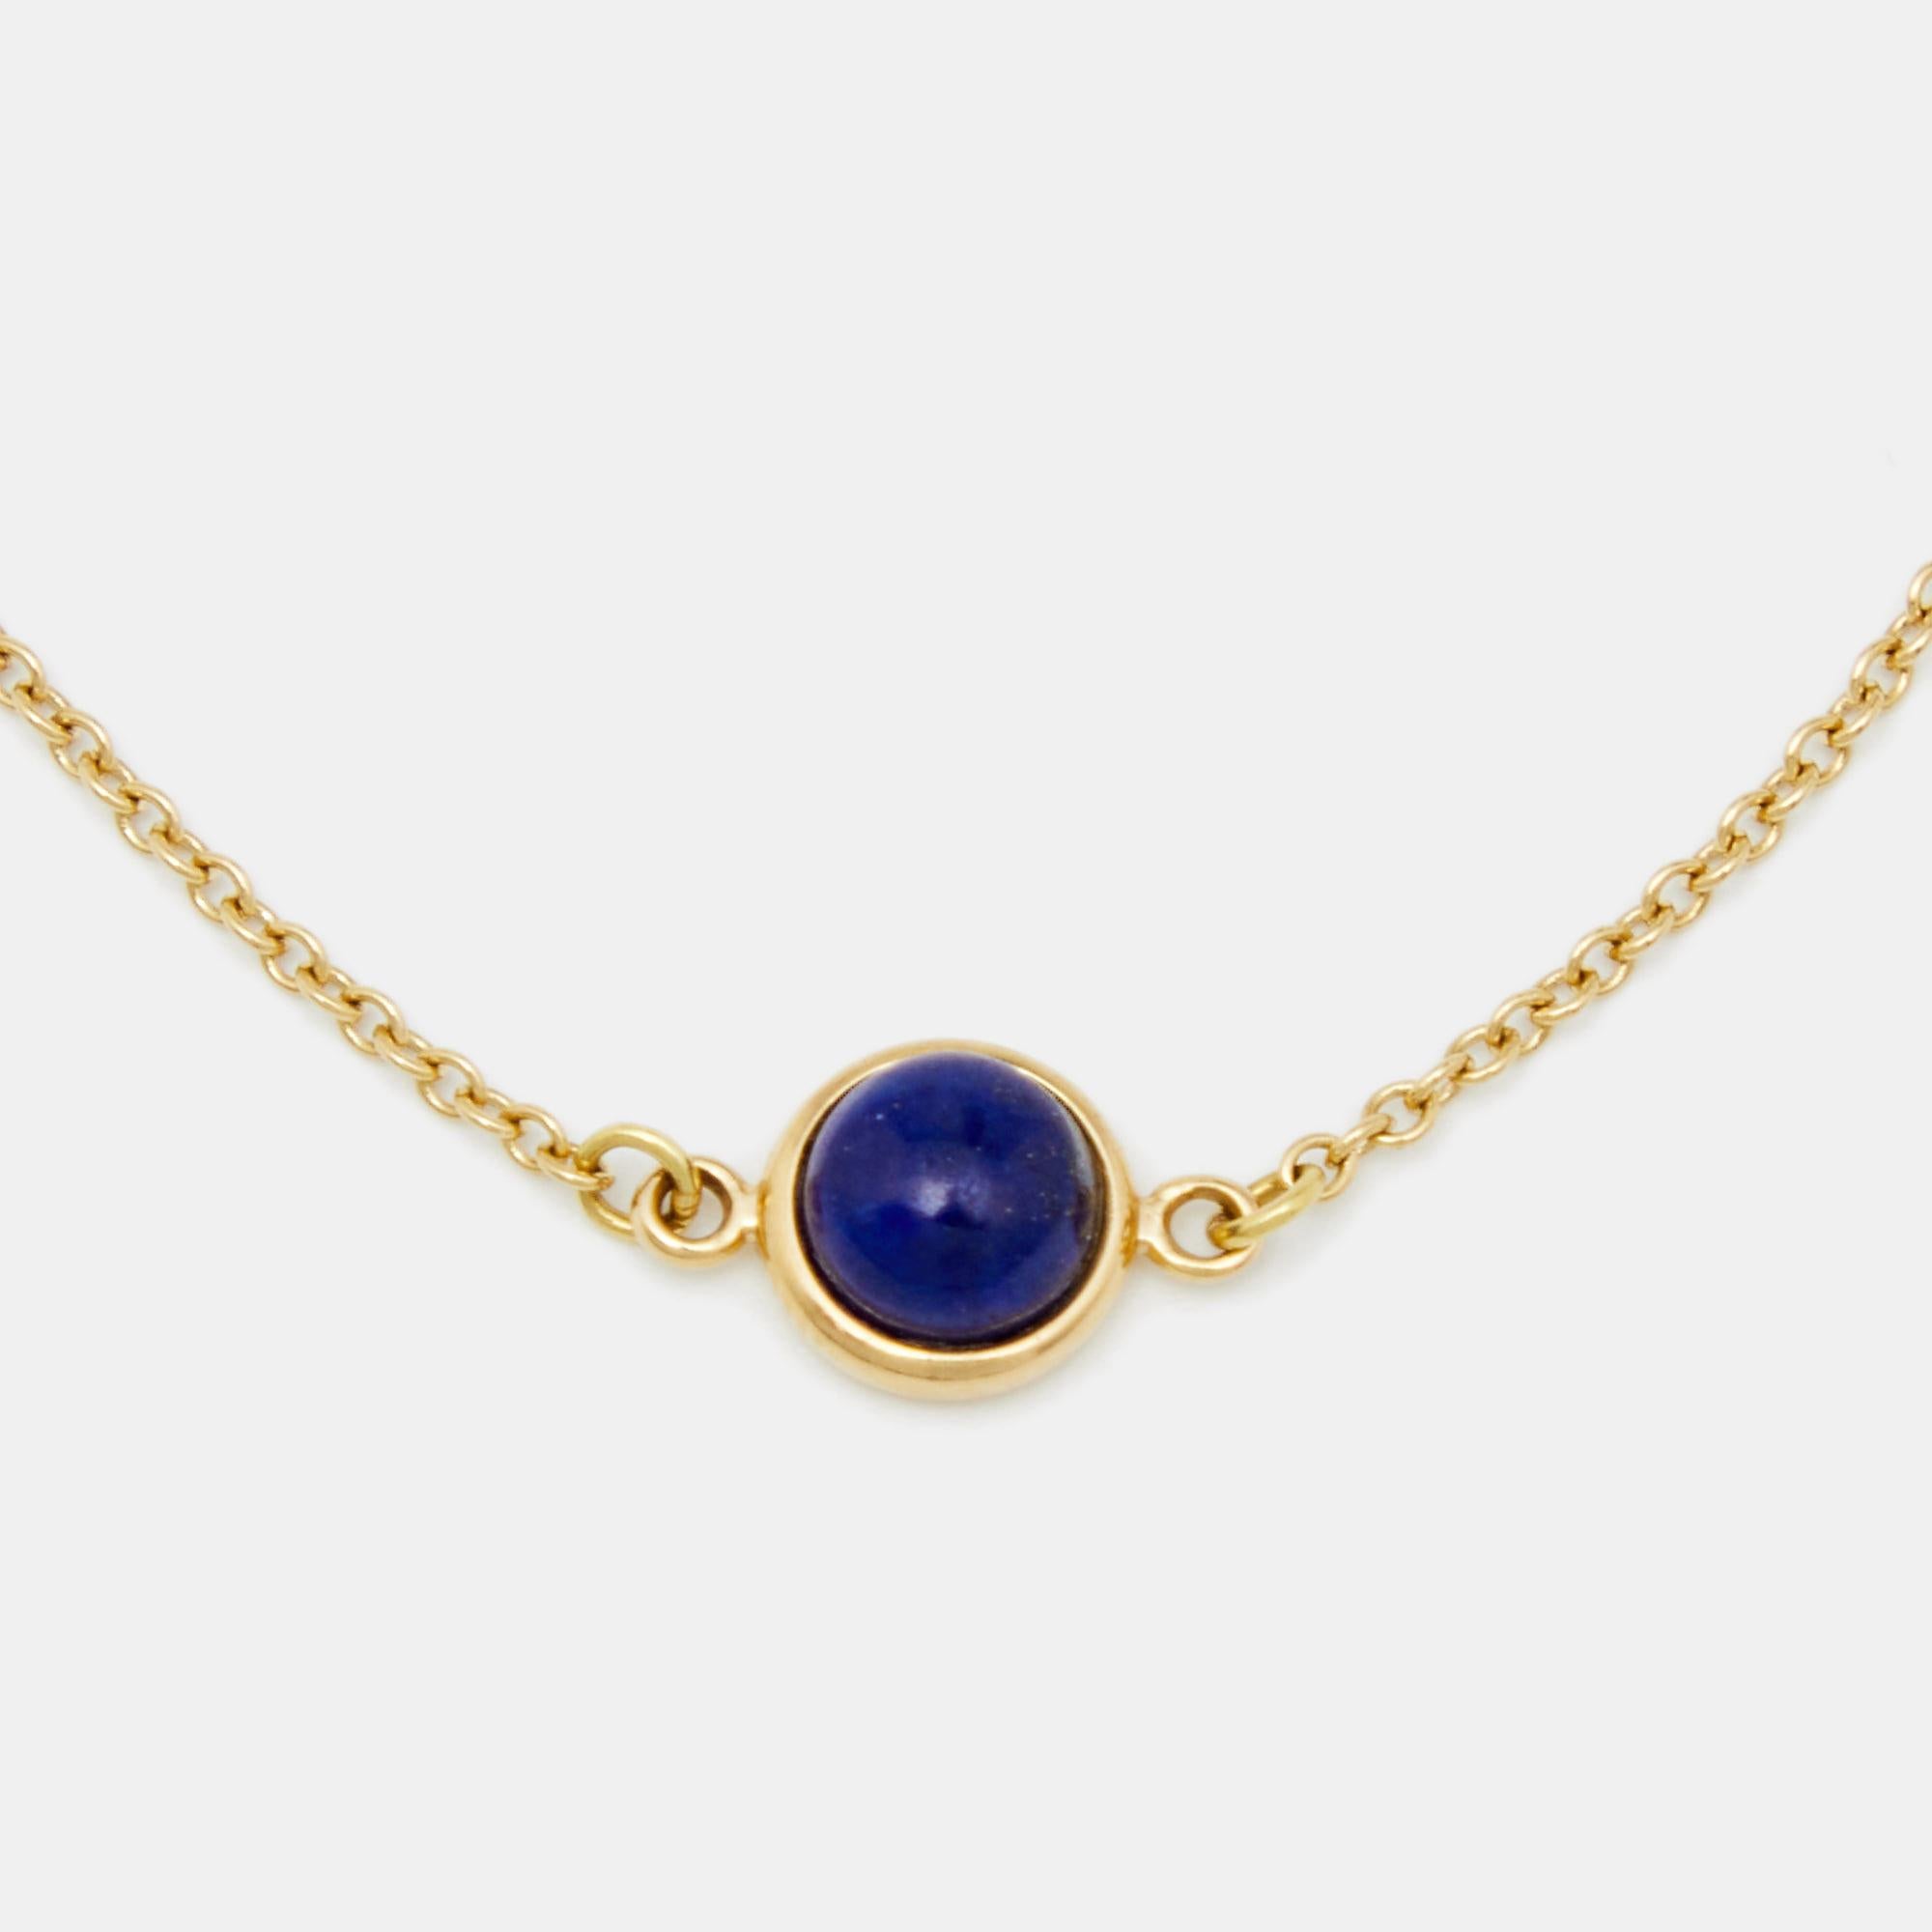 Constructed in 18k yellow gold, this Tiffany & Co. Elsa Peretti Color by the Yard bracelet will make an elegant and stylish addition to your collection. The delicate chain on this bracelet holds a spring-ring clasp and a single Lapis Lazuli as the